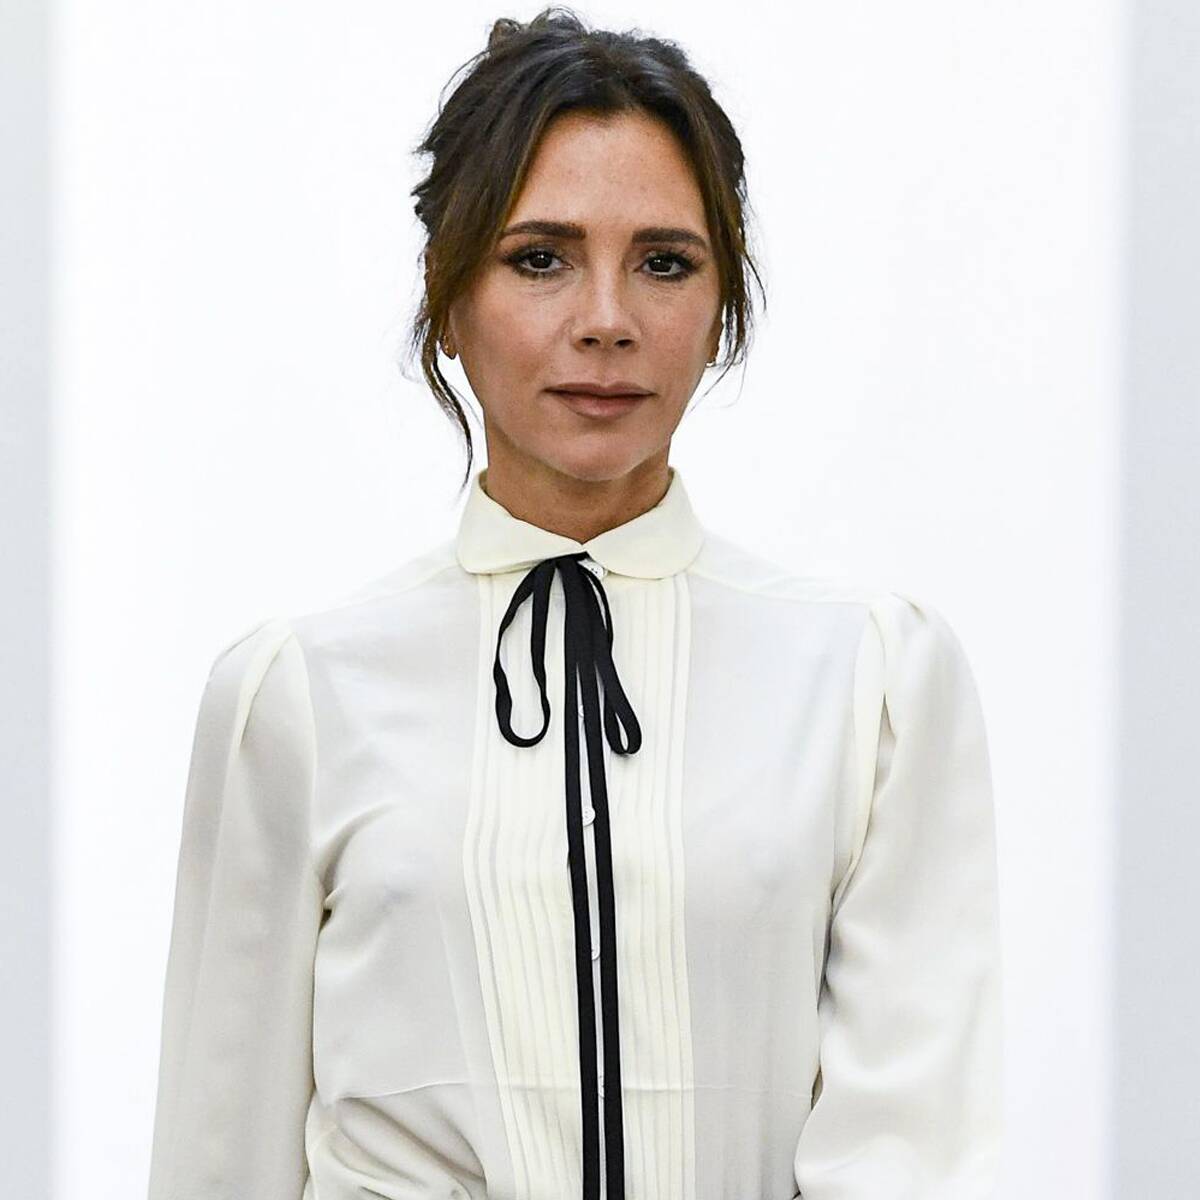 Victoria Beckham Recalls the "Life-Changing Moment" She Knew She Had to Leave the Spice Girls